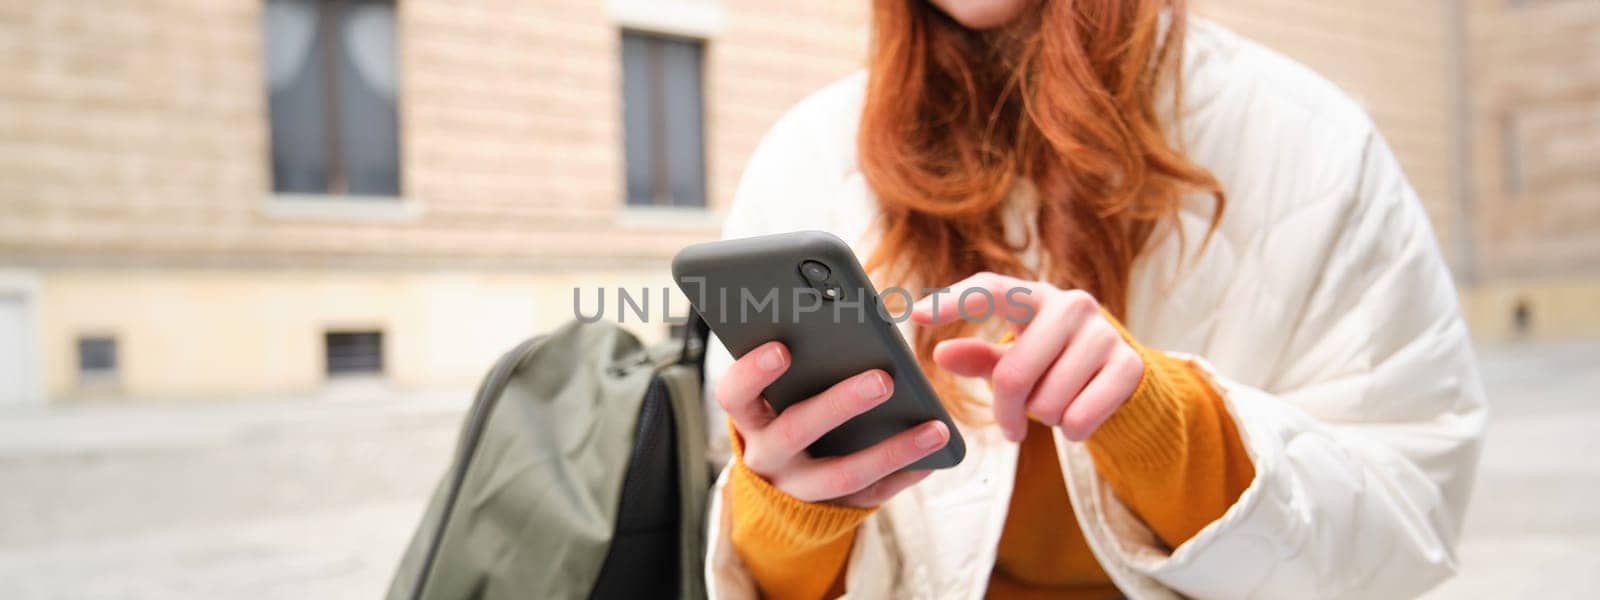 Close up of female hands typing on mobile phone, using smartphone app. GIrl with telephone types, sits outdoors and uses map.